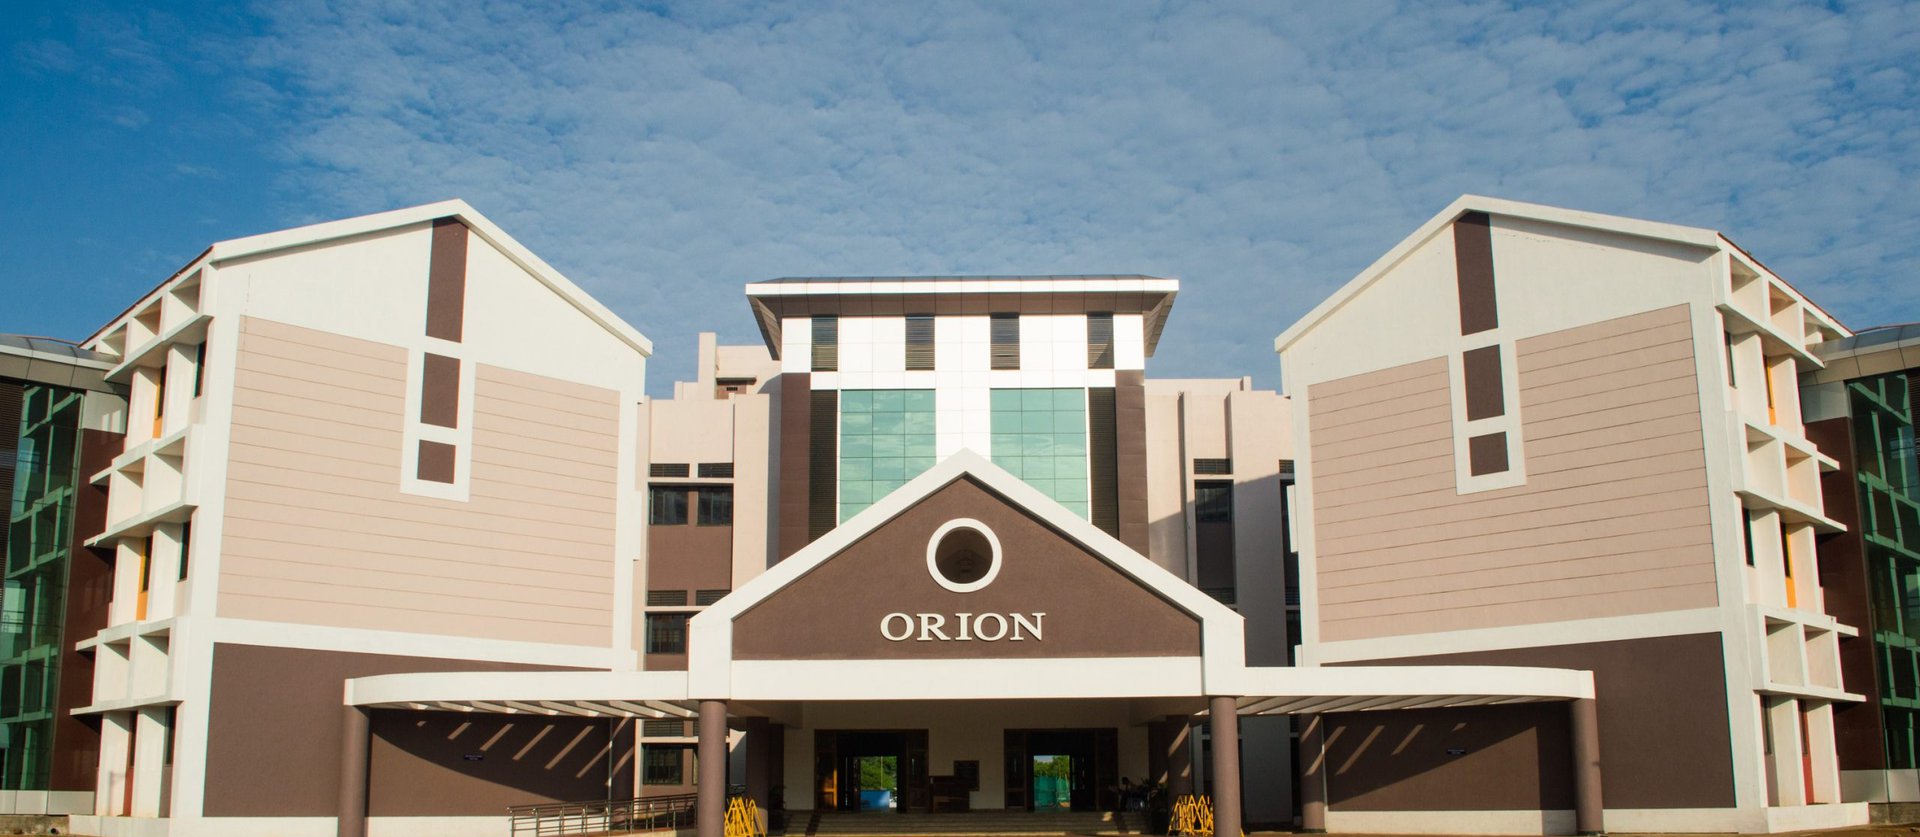 The_Orion_Building-scaled.jpg